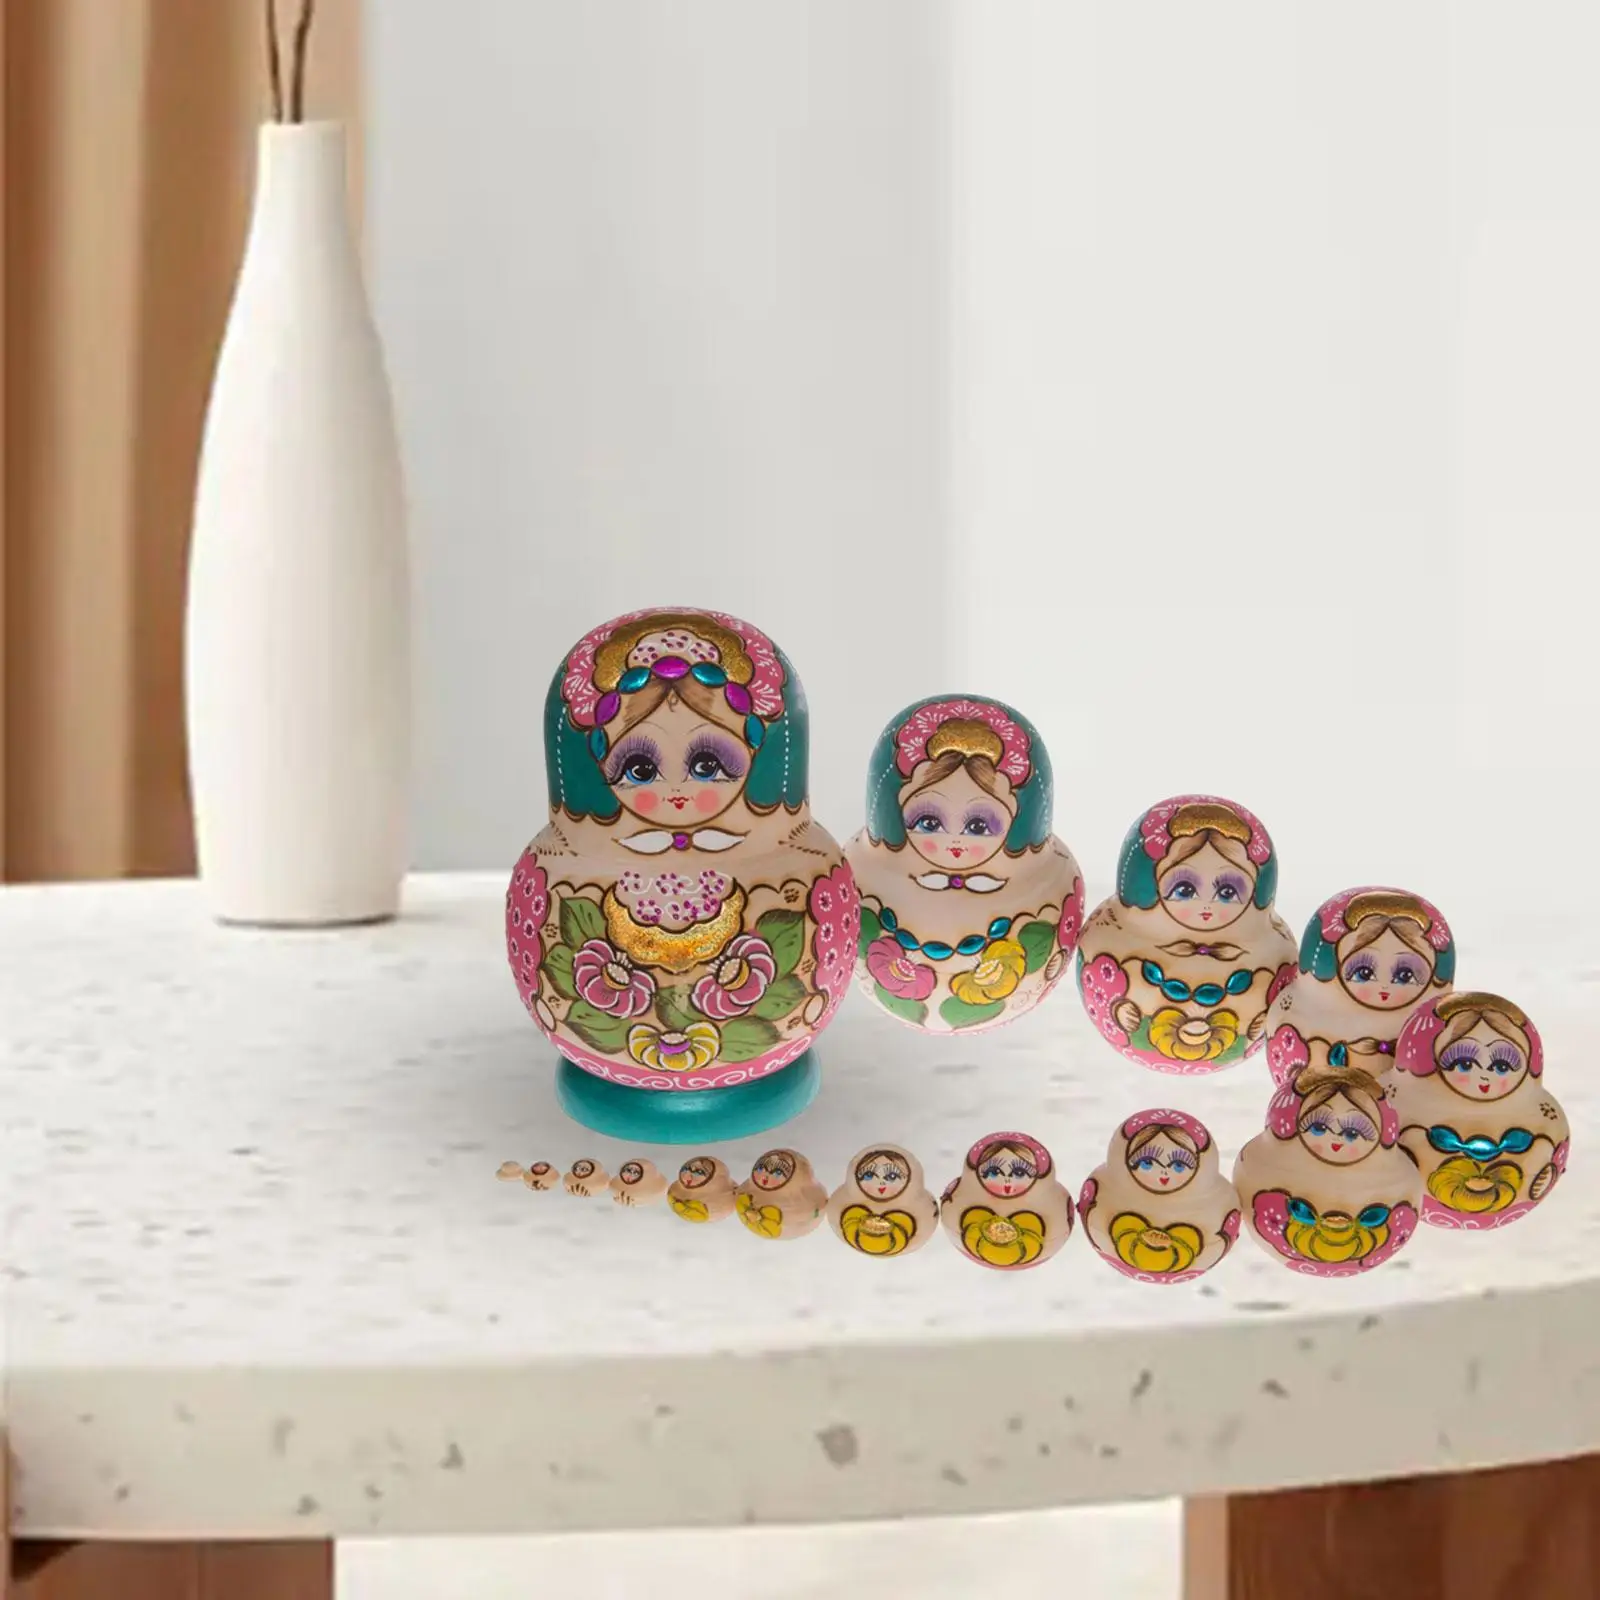 15x Lovely Stacking Dolls Figures Crafts Traditional Collectible Lovely Nesting Doll for Table Birthday Room Home Decoration